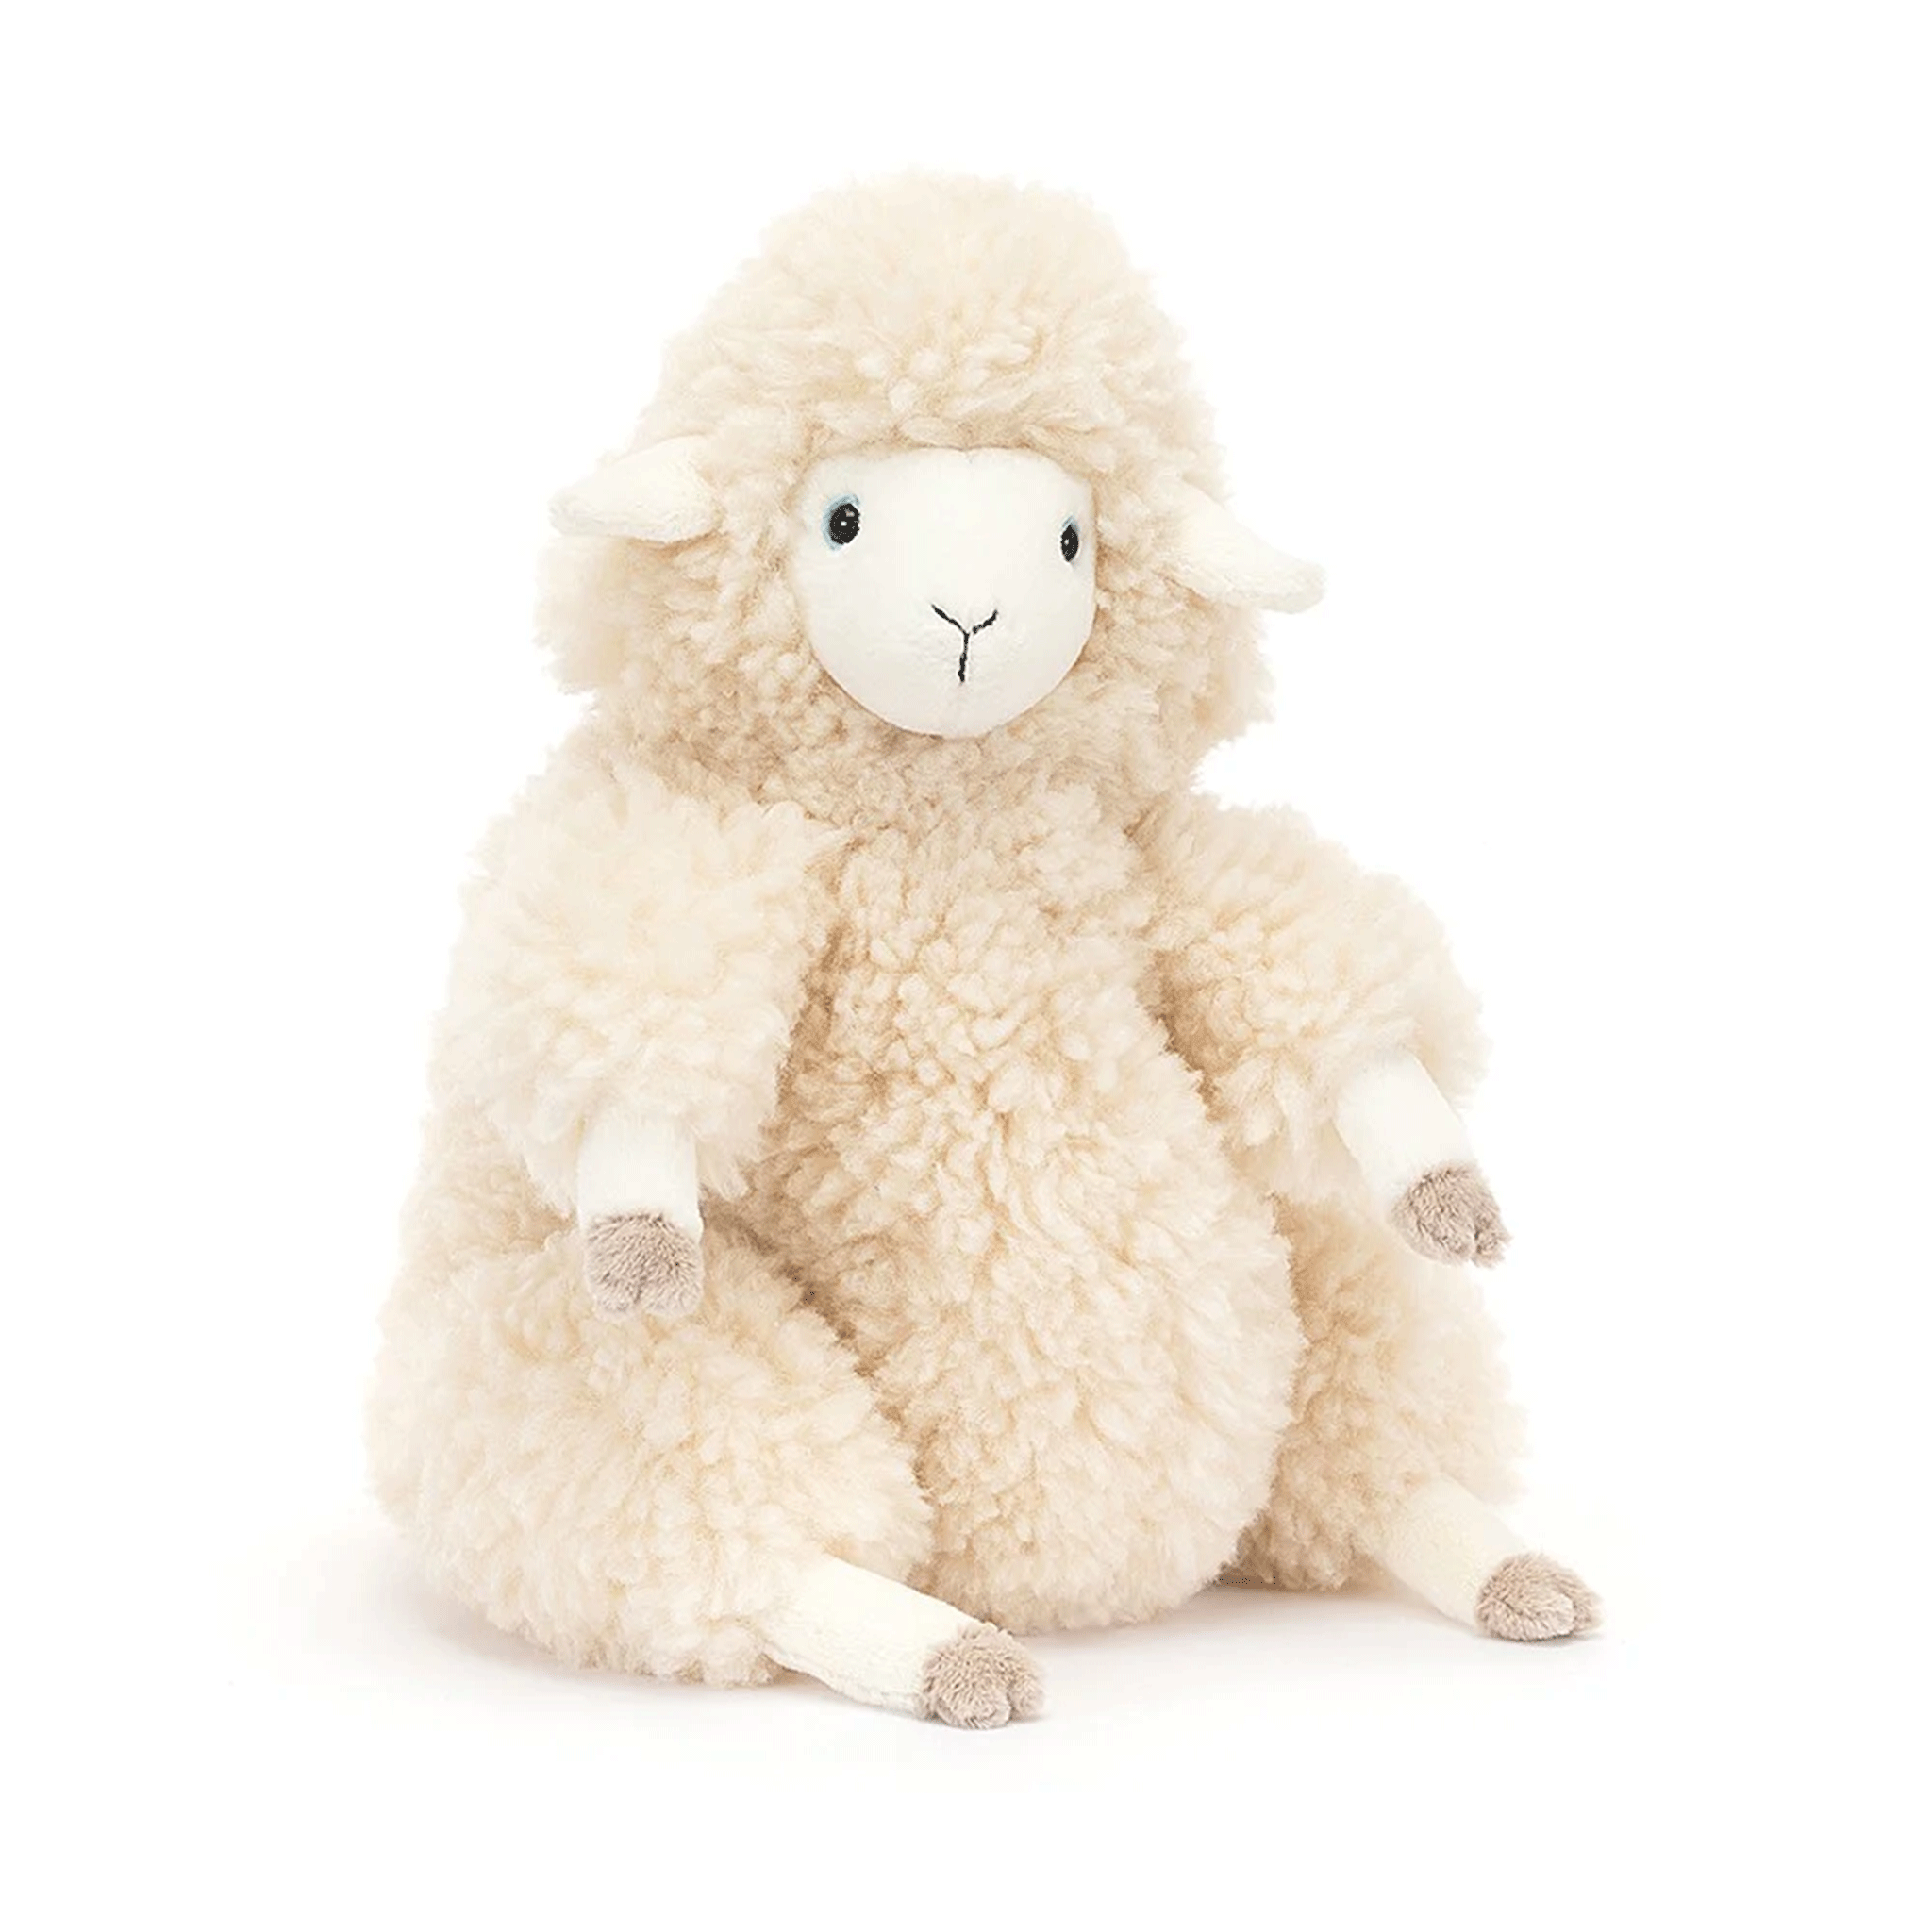 On a white background is an ivory fluffy sheep stuffed animal toy. 